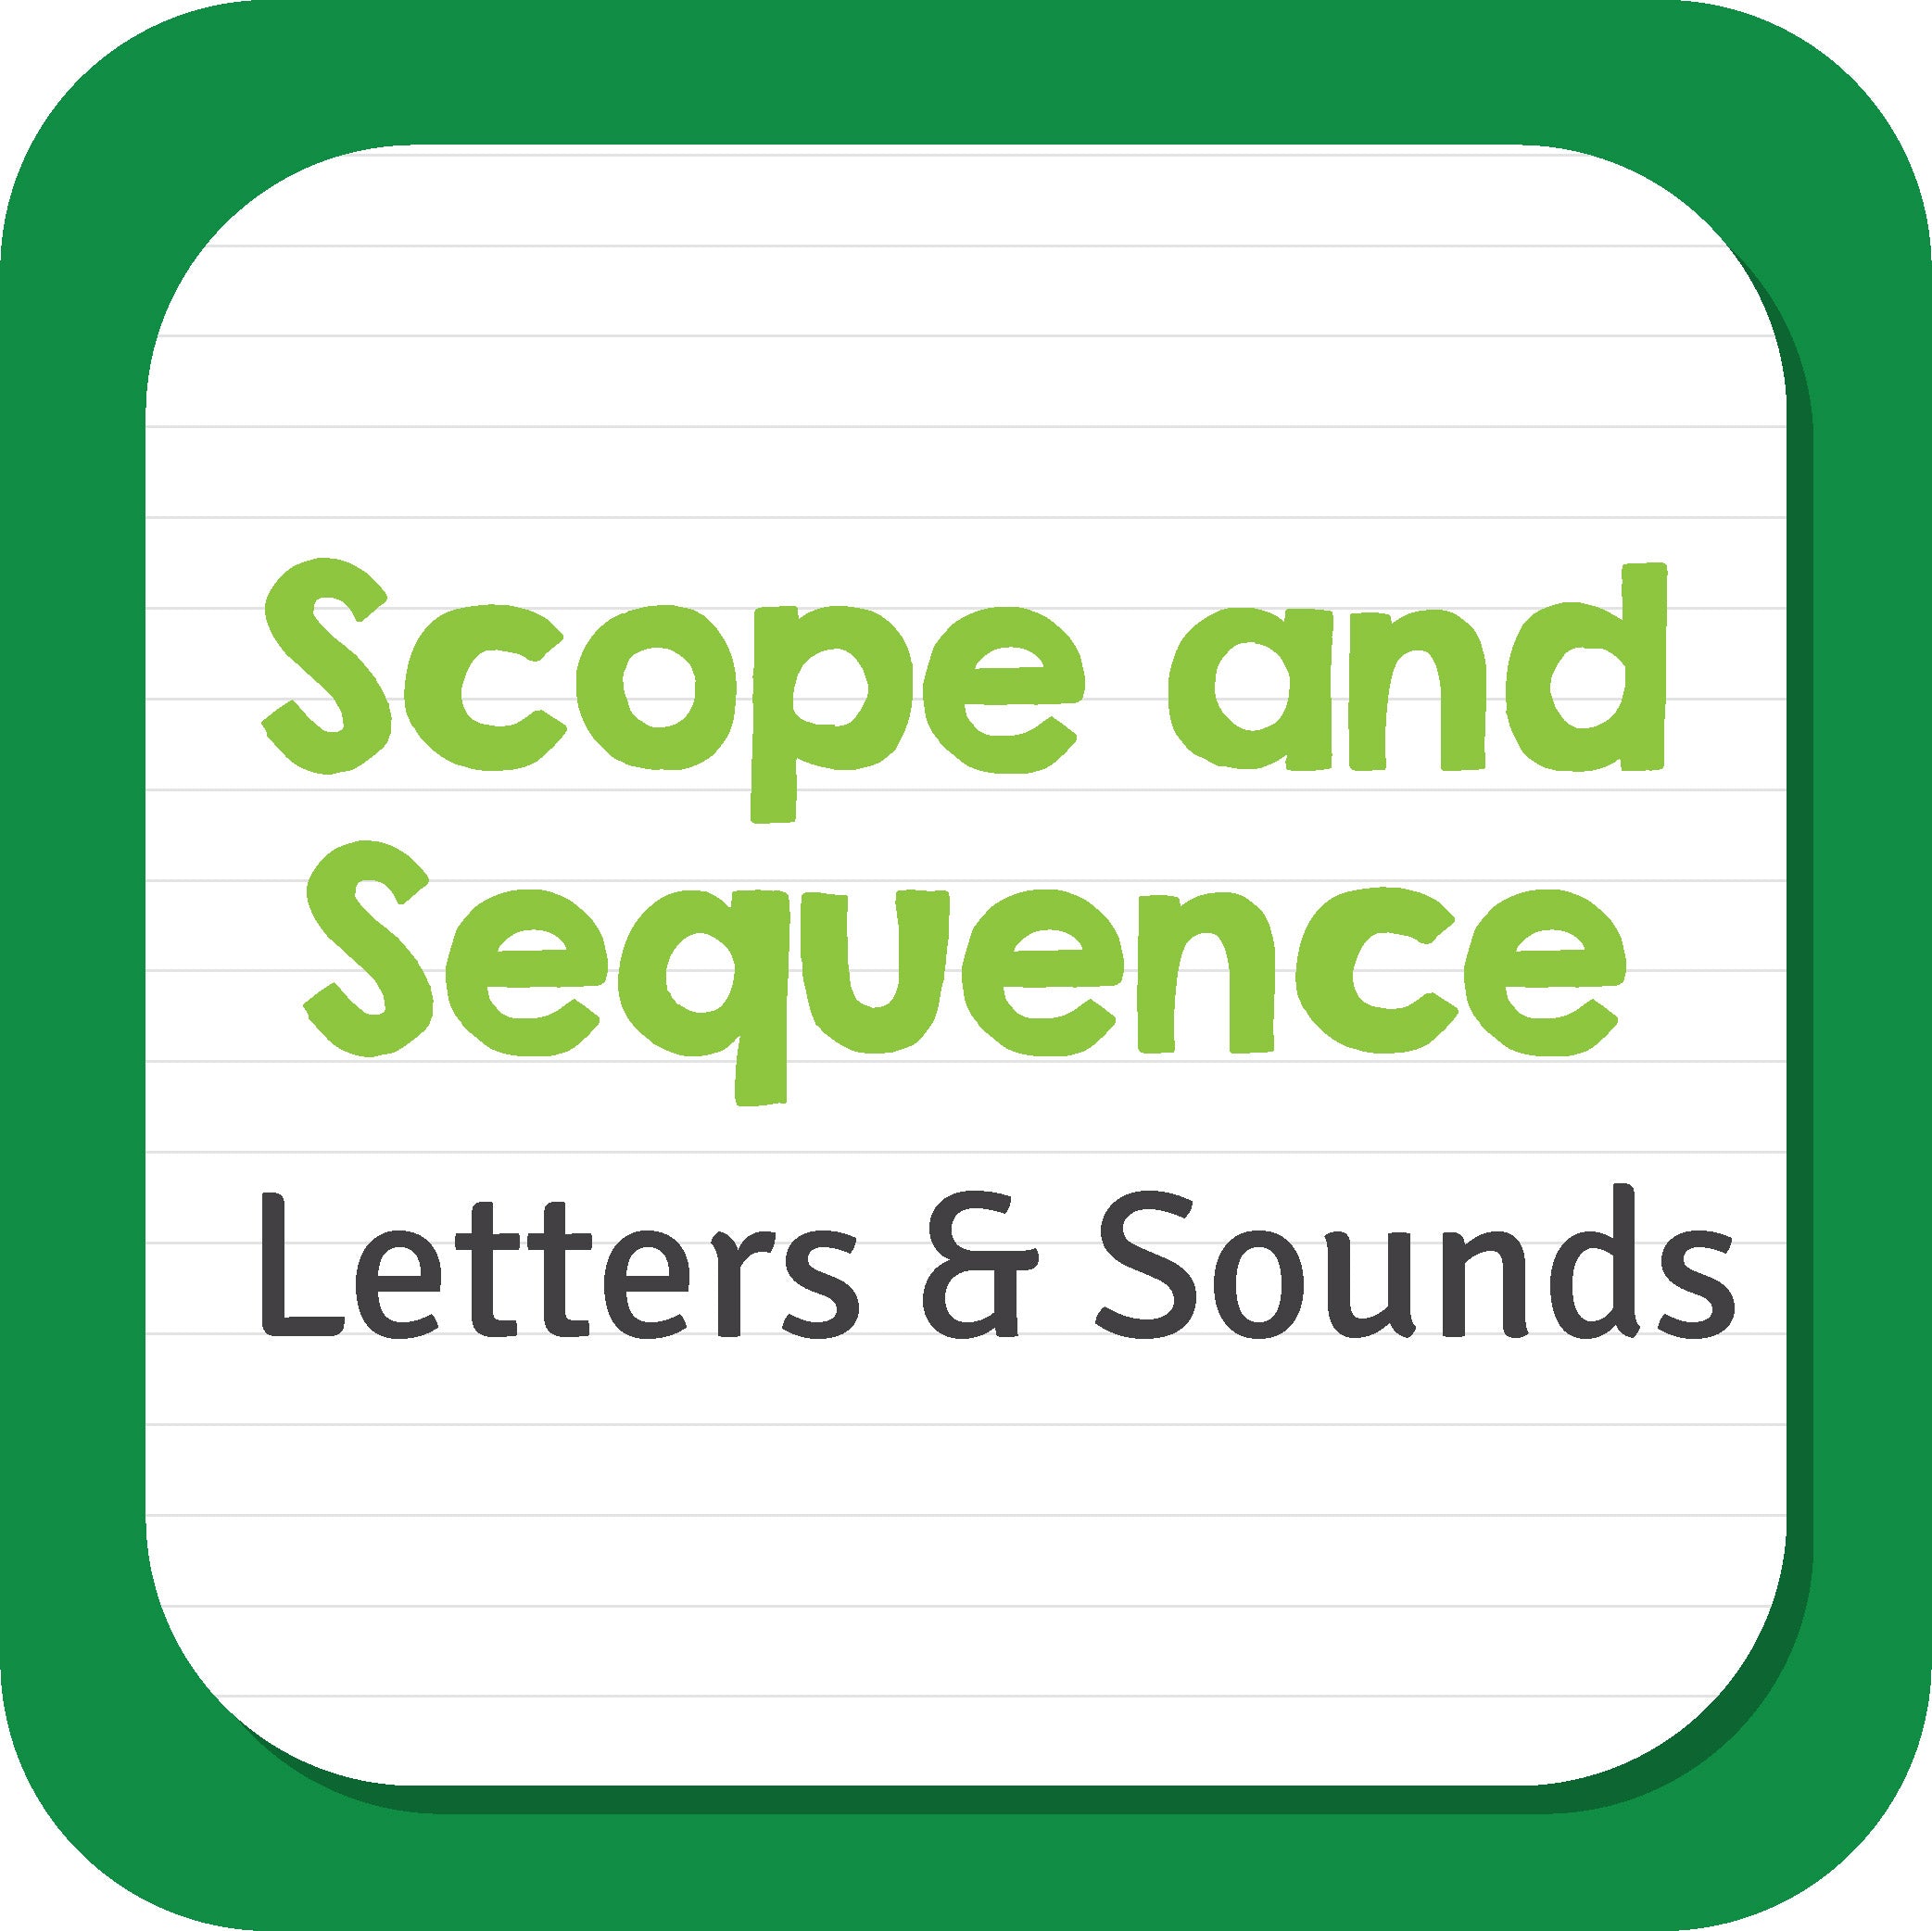 Letters & Sounds Scope and Sequence